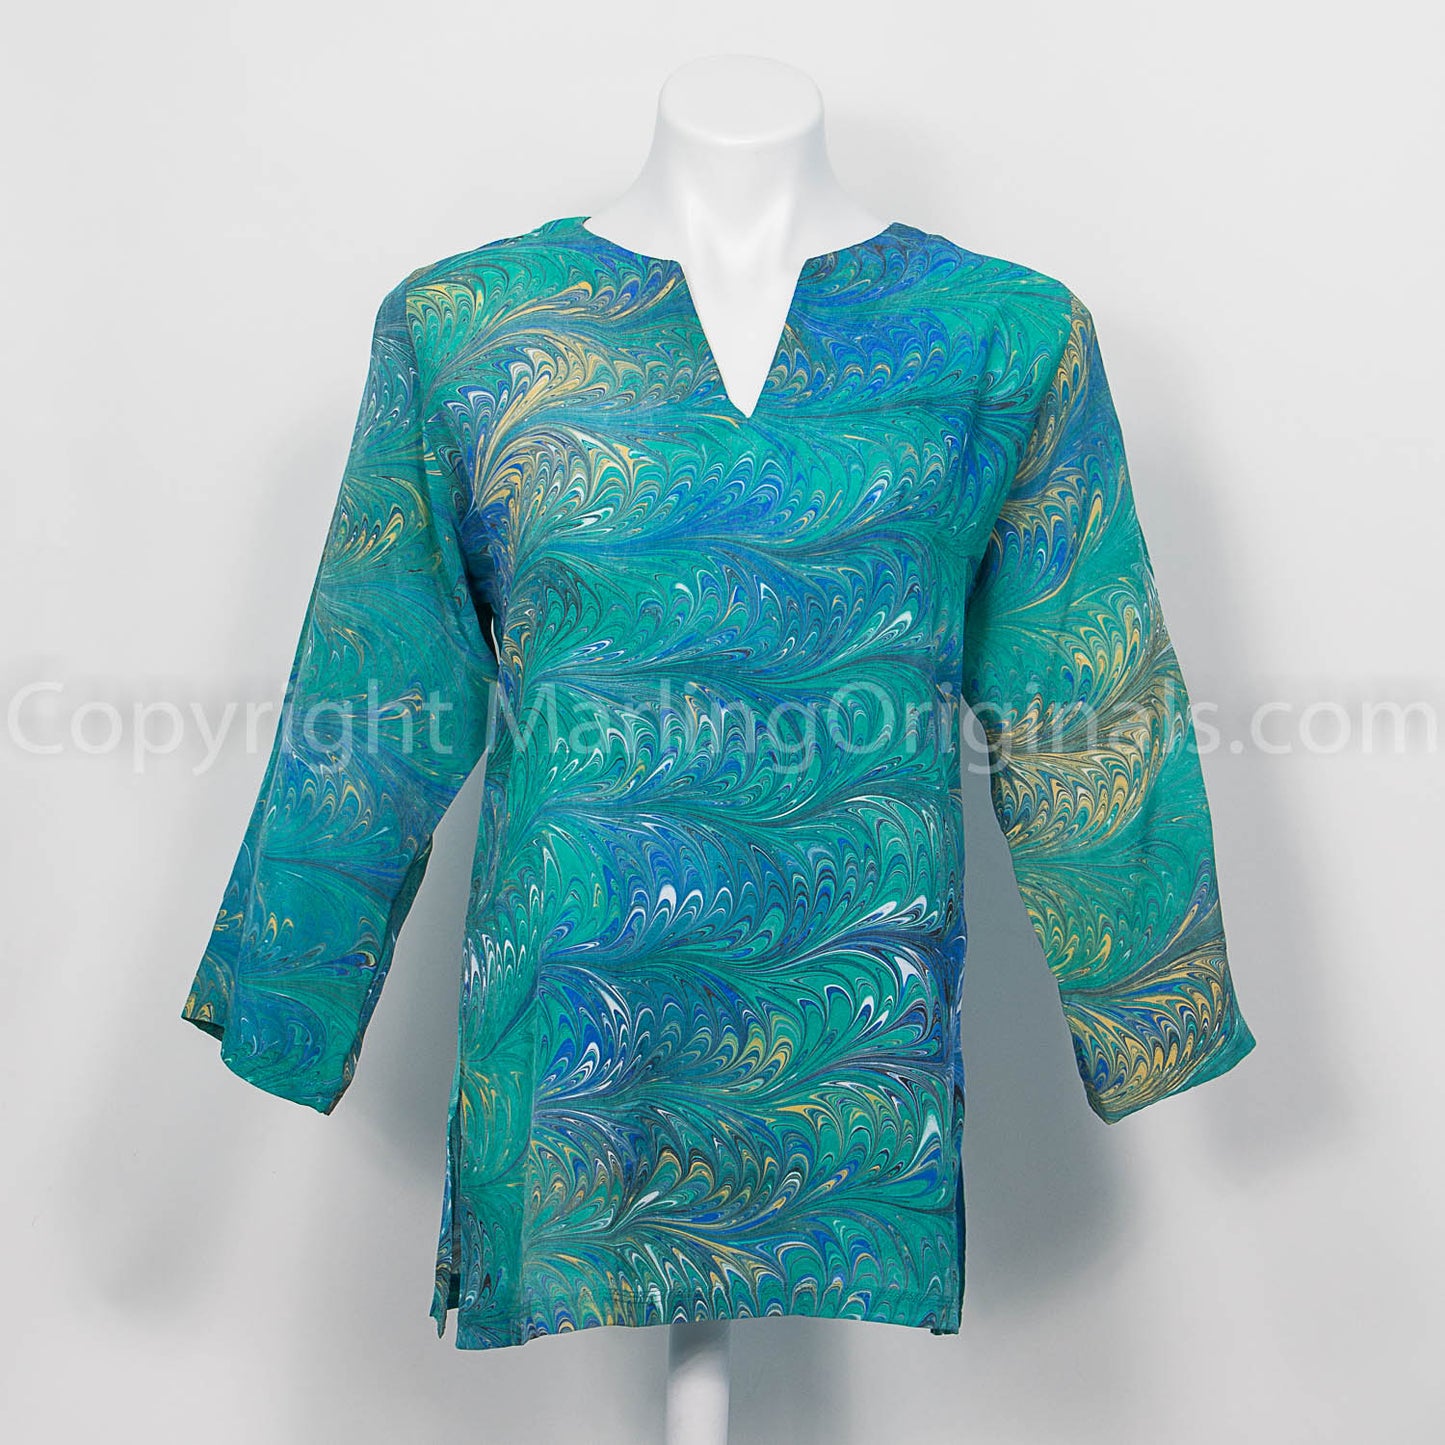 Silk tunic marbled in feathered pattern in greens, blues, yellow, white. 3/4 sleeve, notched neck.